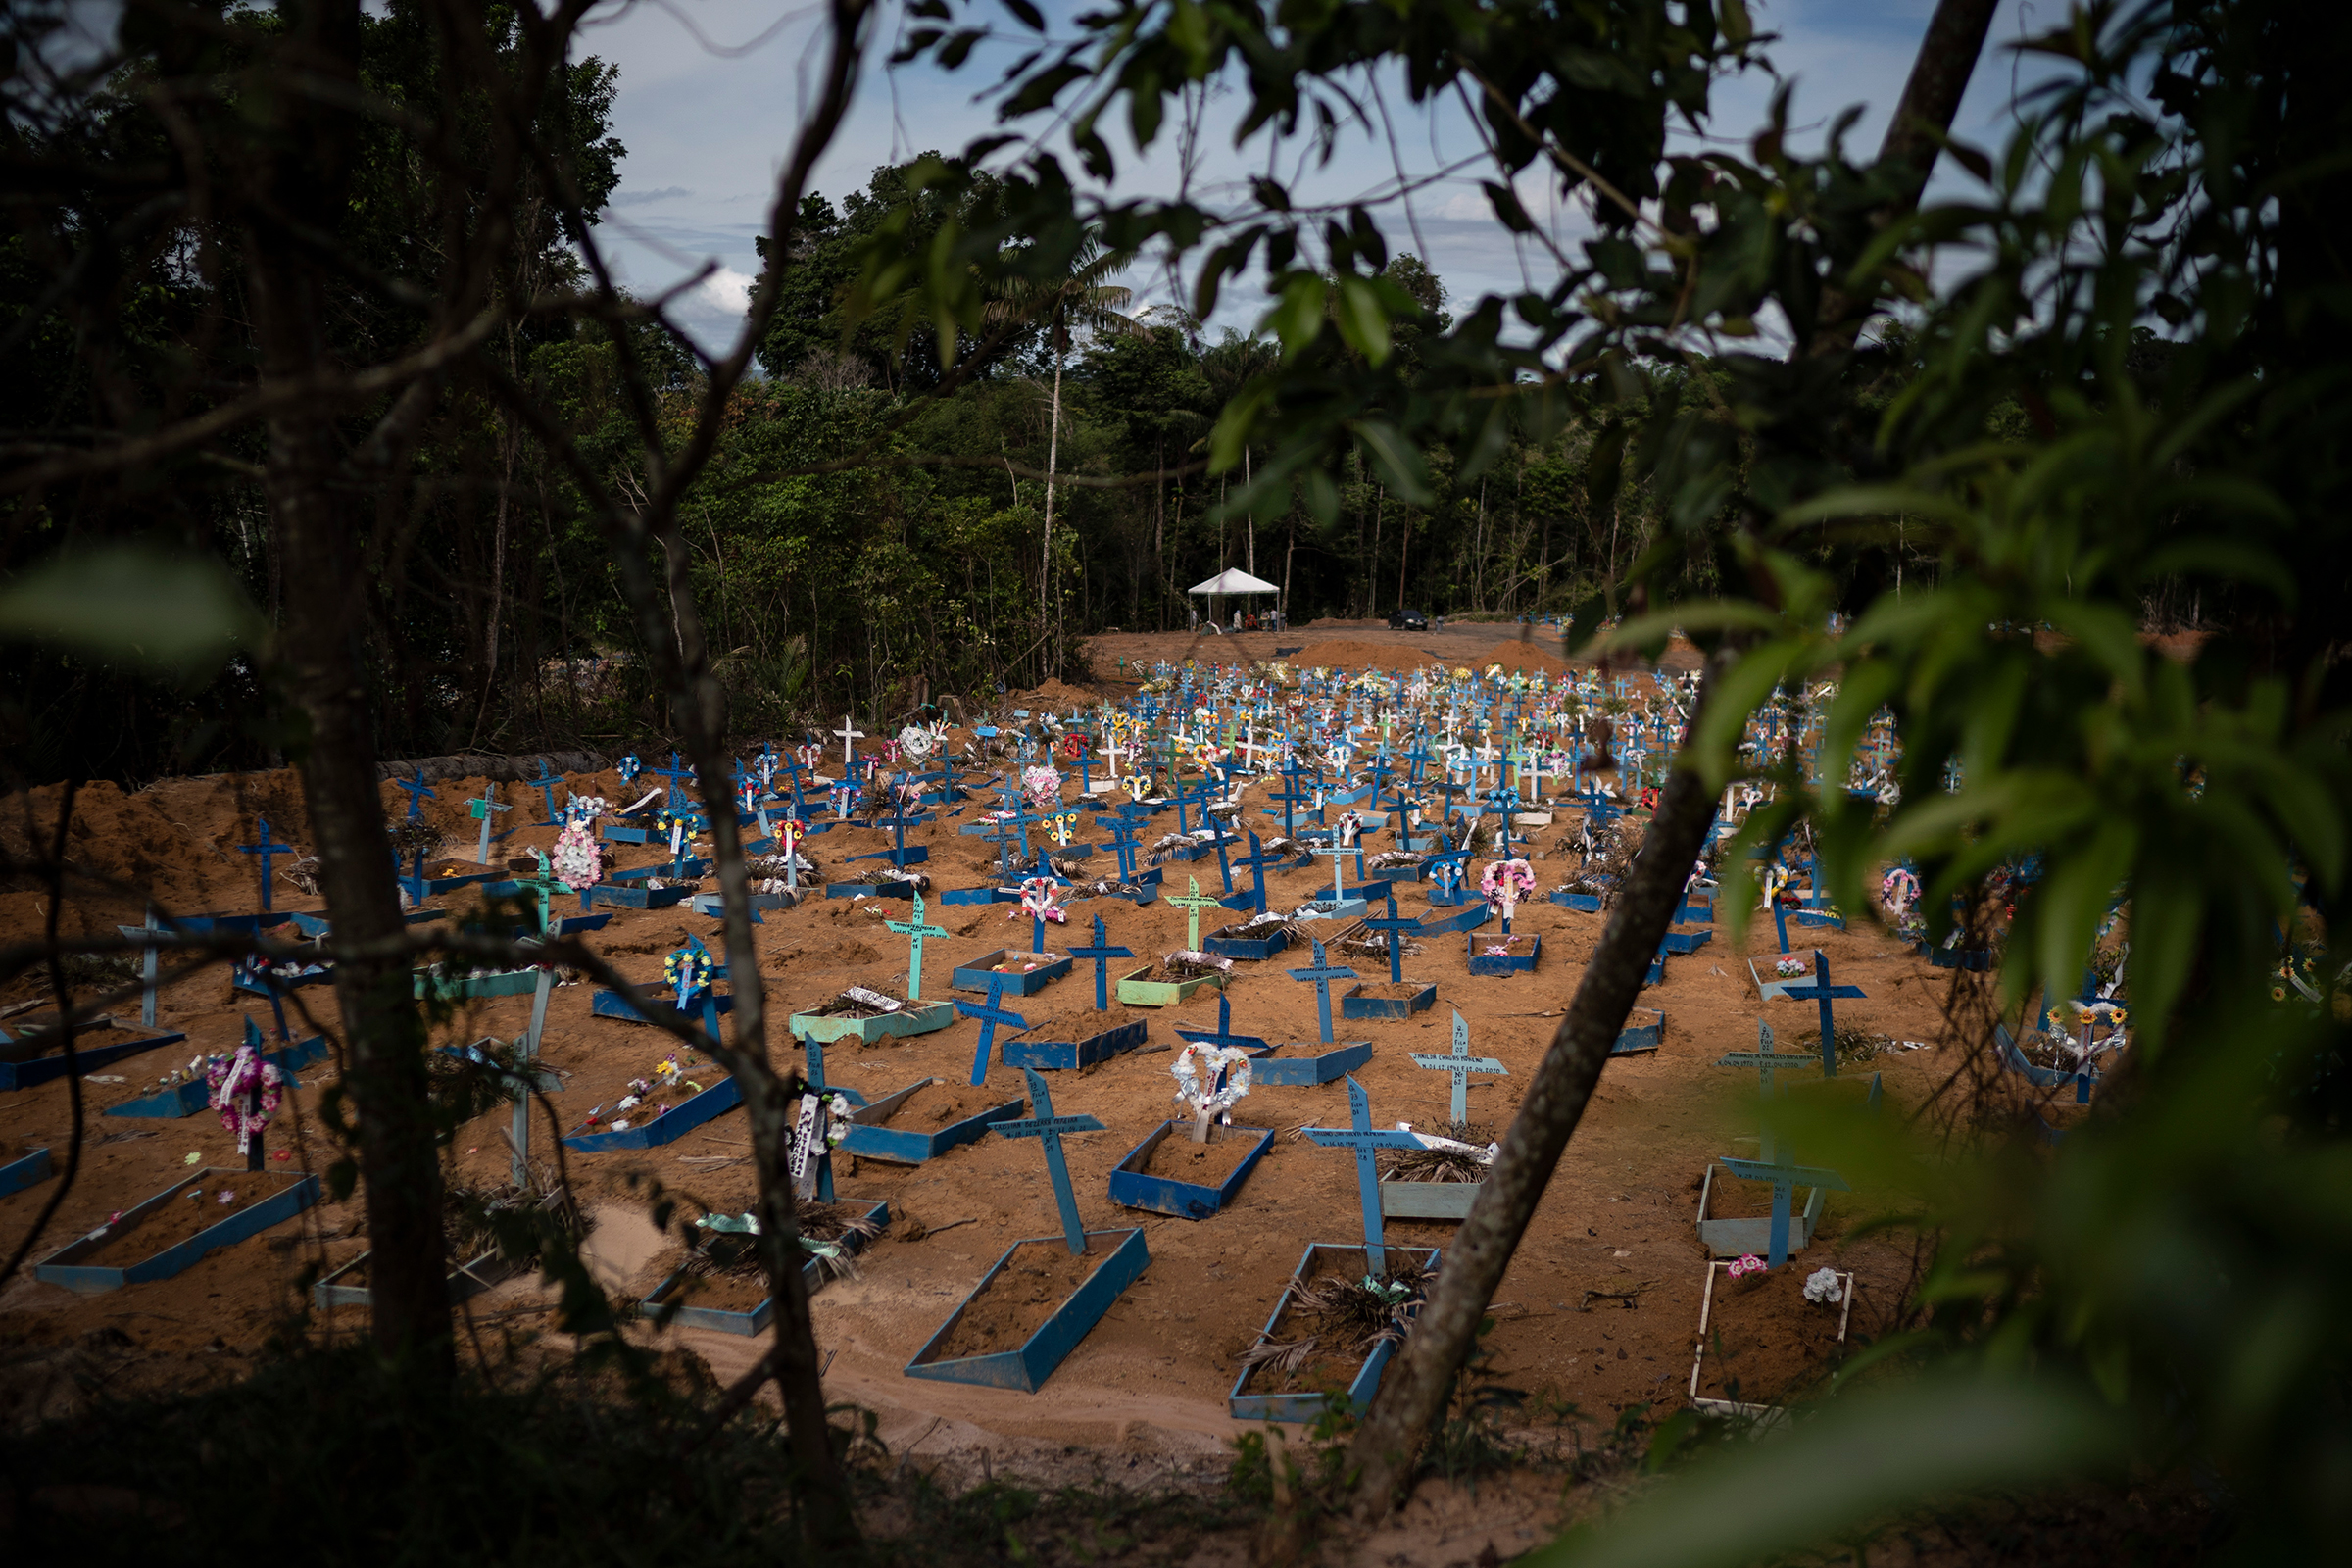 Graves of people who died in the past 30 days fill a new section of the Nossa Senhora Aparecida cemetery in Manaus, Brazil, on May 11, 2020. The new section was opened last month to cope with a sudden surge in deaths.